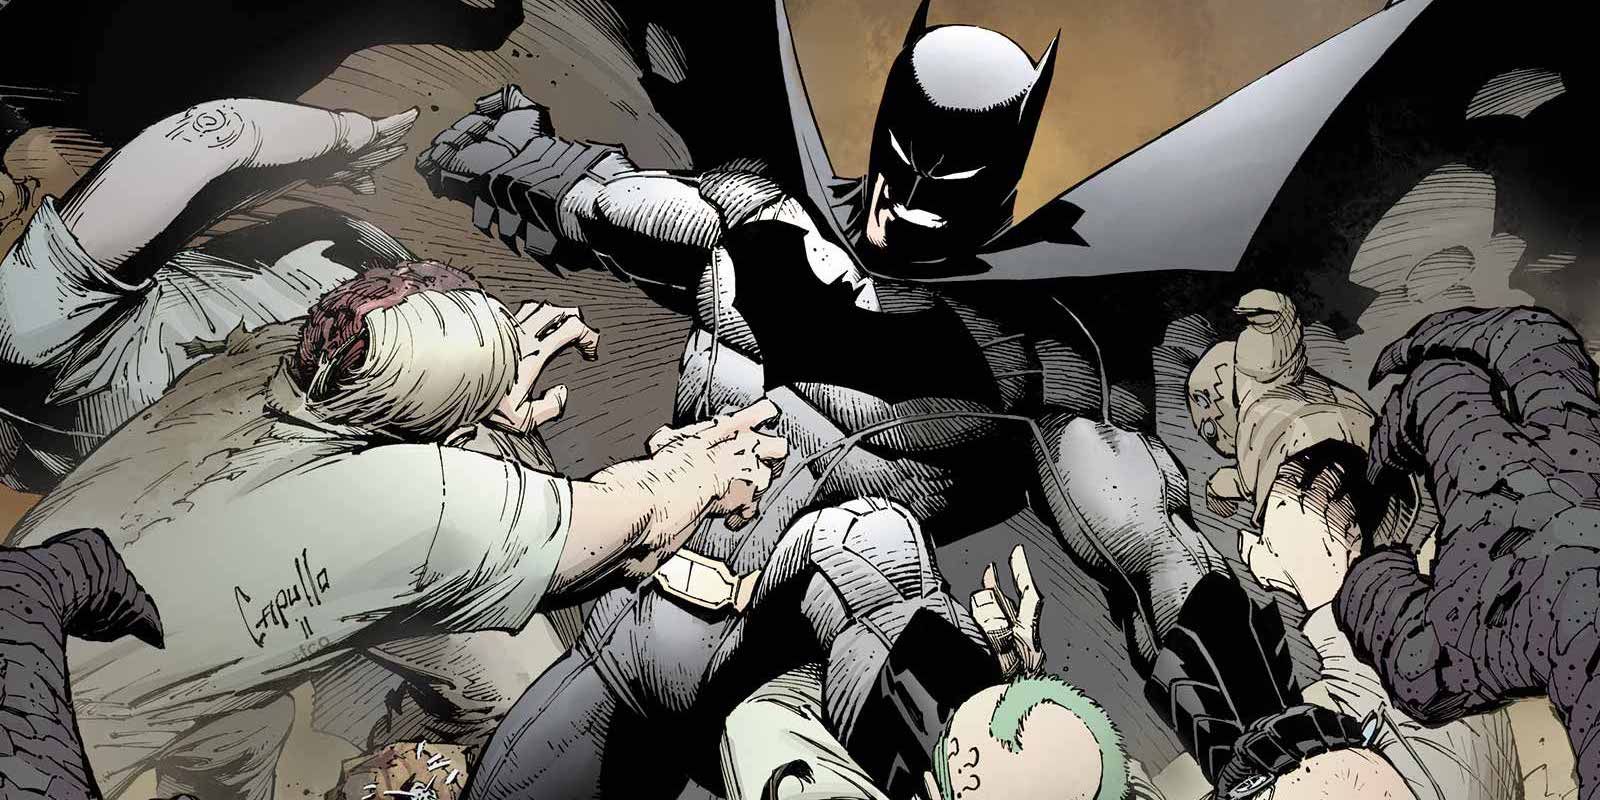 Batman fighting members of the Court of Owls